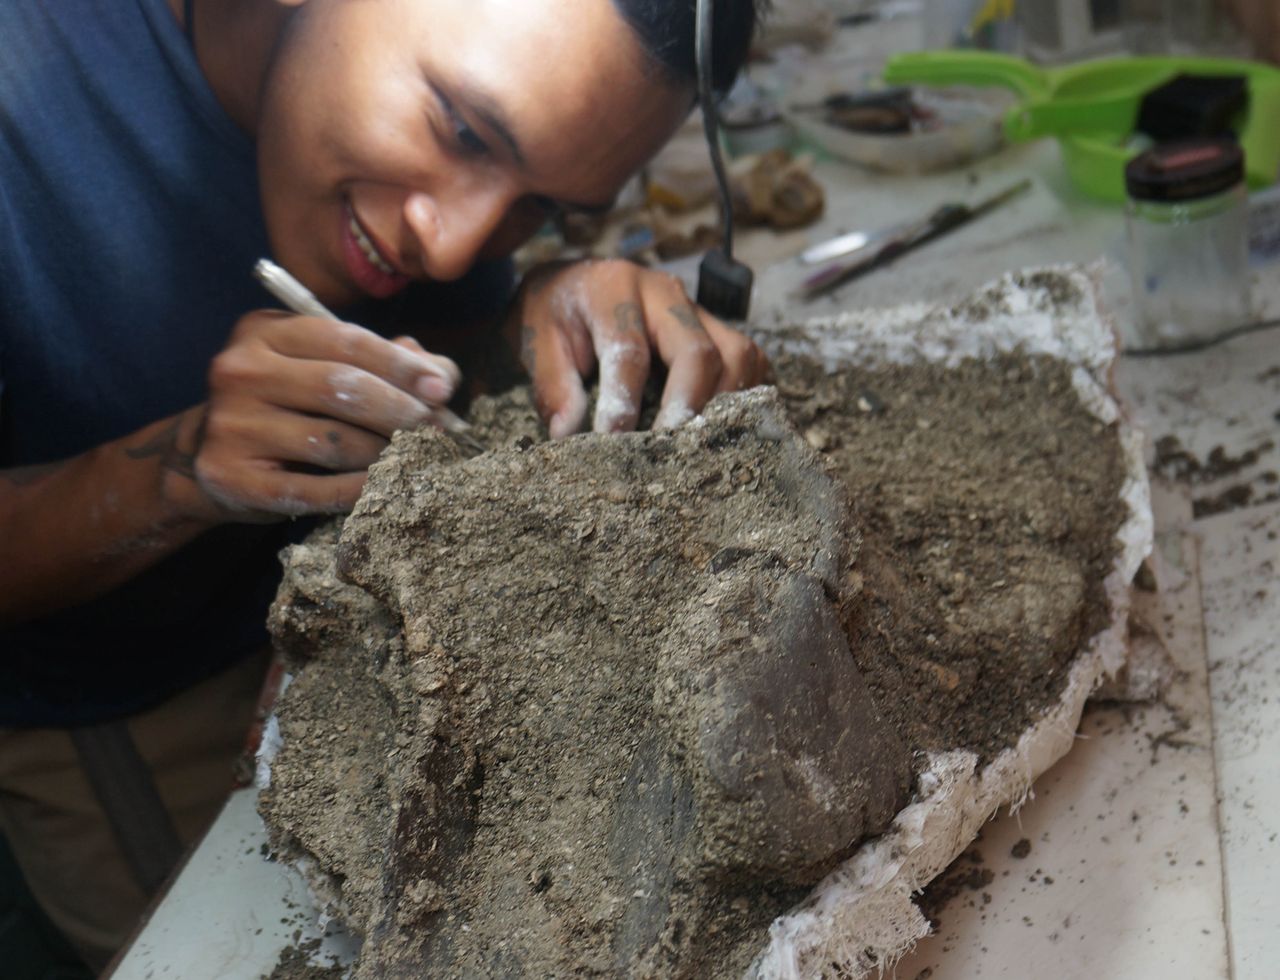 16-million-year-old freshwater dolphin fossil discovered in Amazon